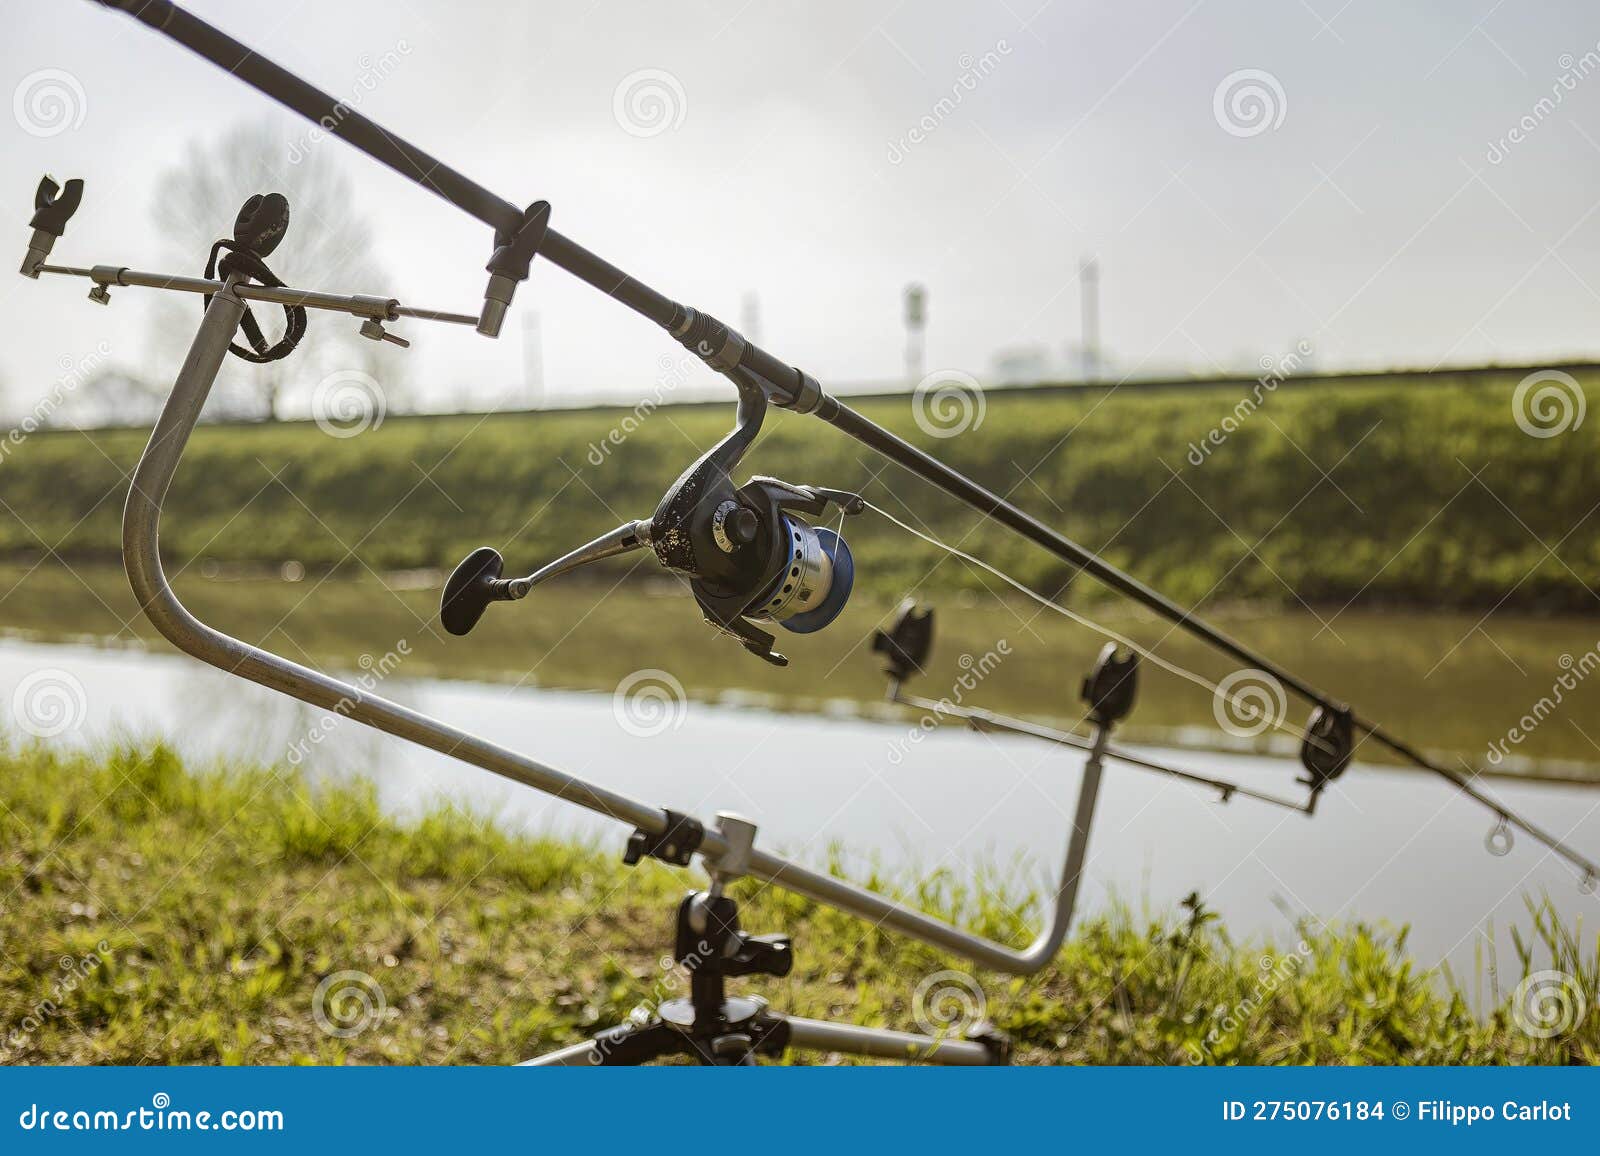 Carp Fishing Equipment on the Bank of a River Stock Photo - Image of  outdoor, reel: 275076184